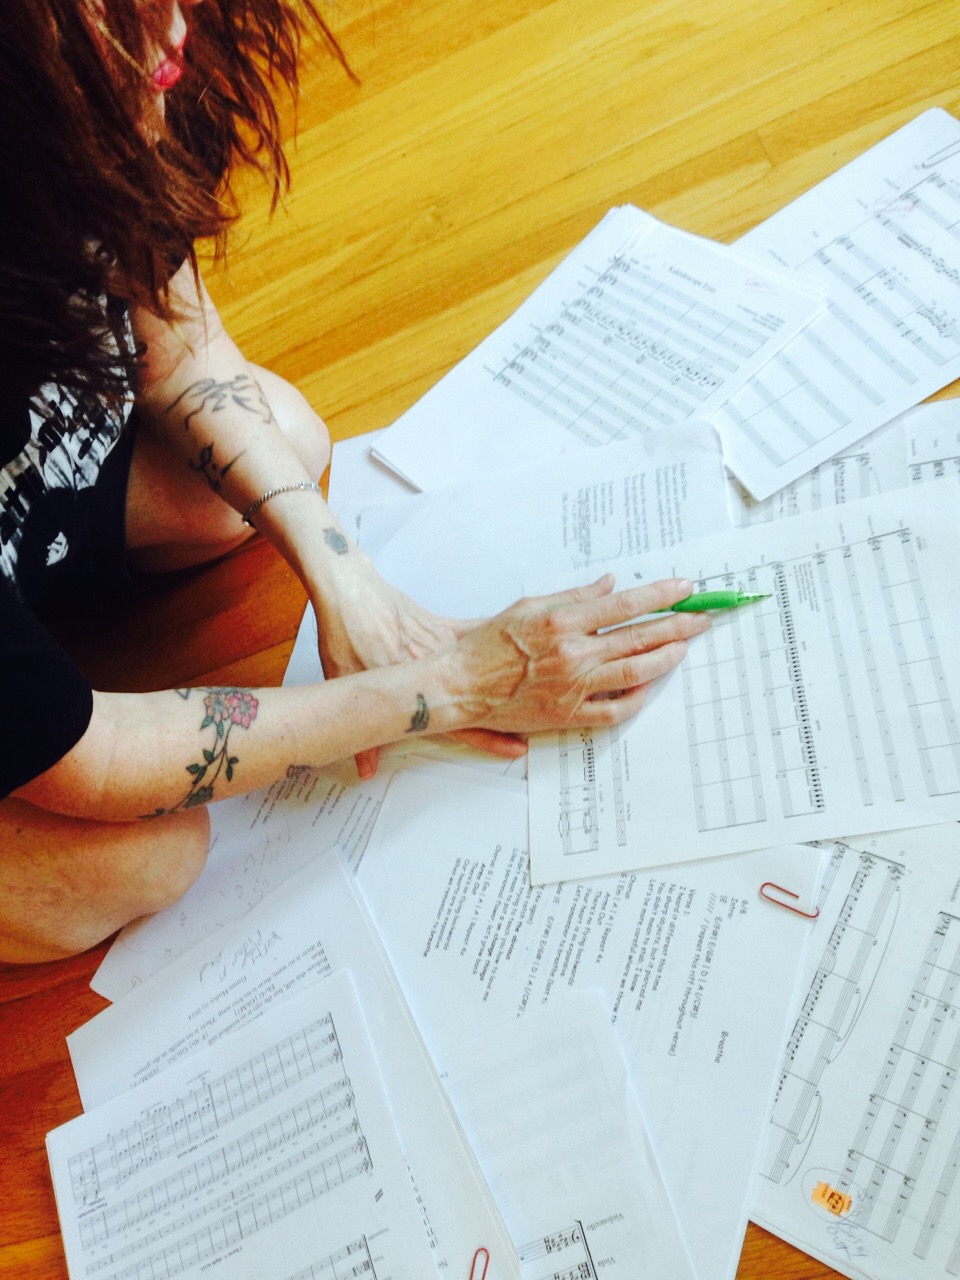 Photo by Angela Castañeda of Gretta with a group of scores and leadsheets.